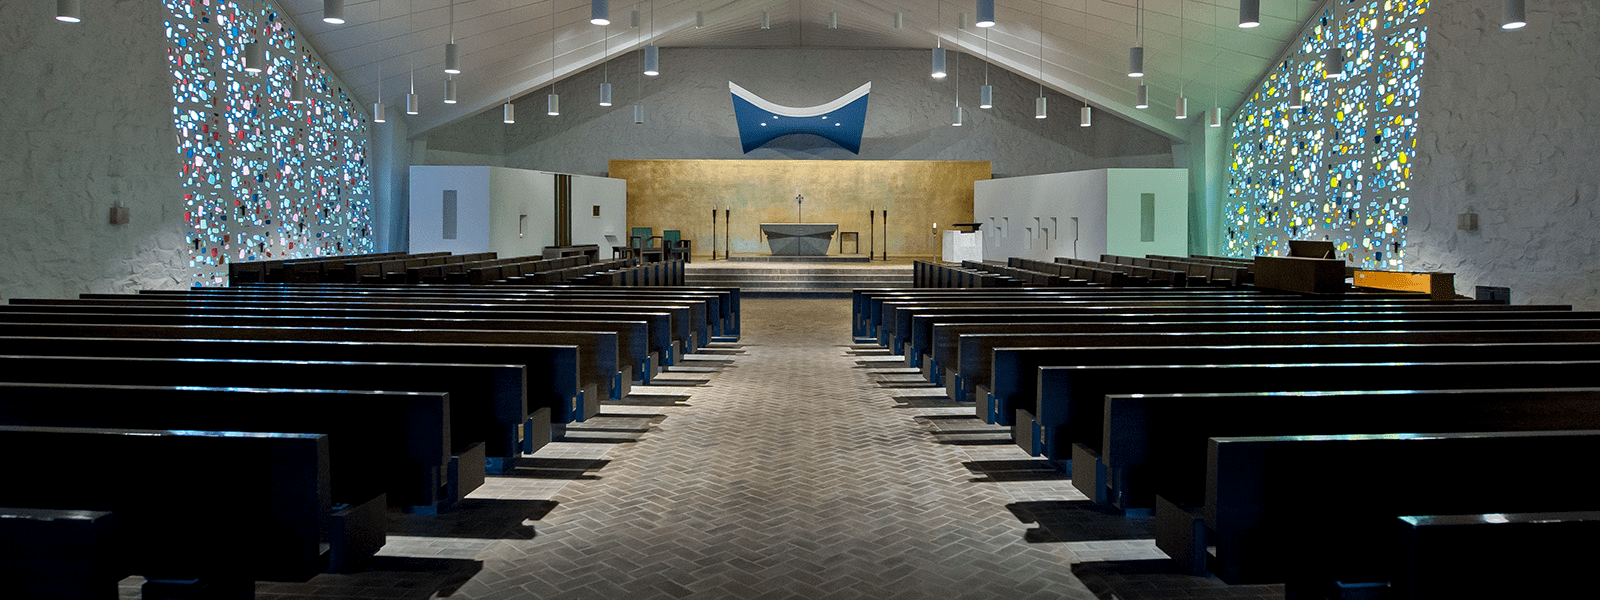 Inside Our Lady of Annunciation Chapel